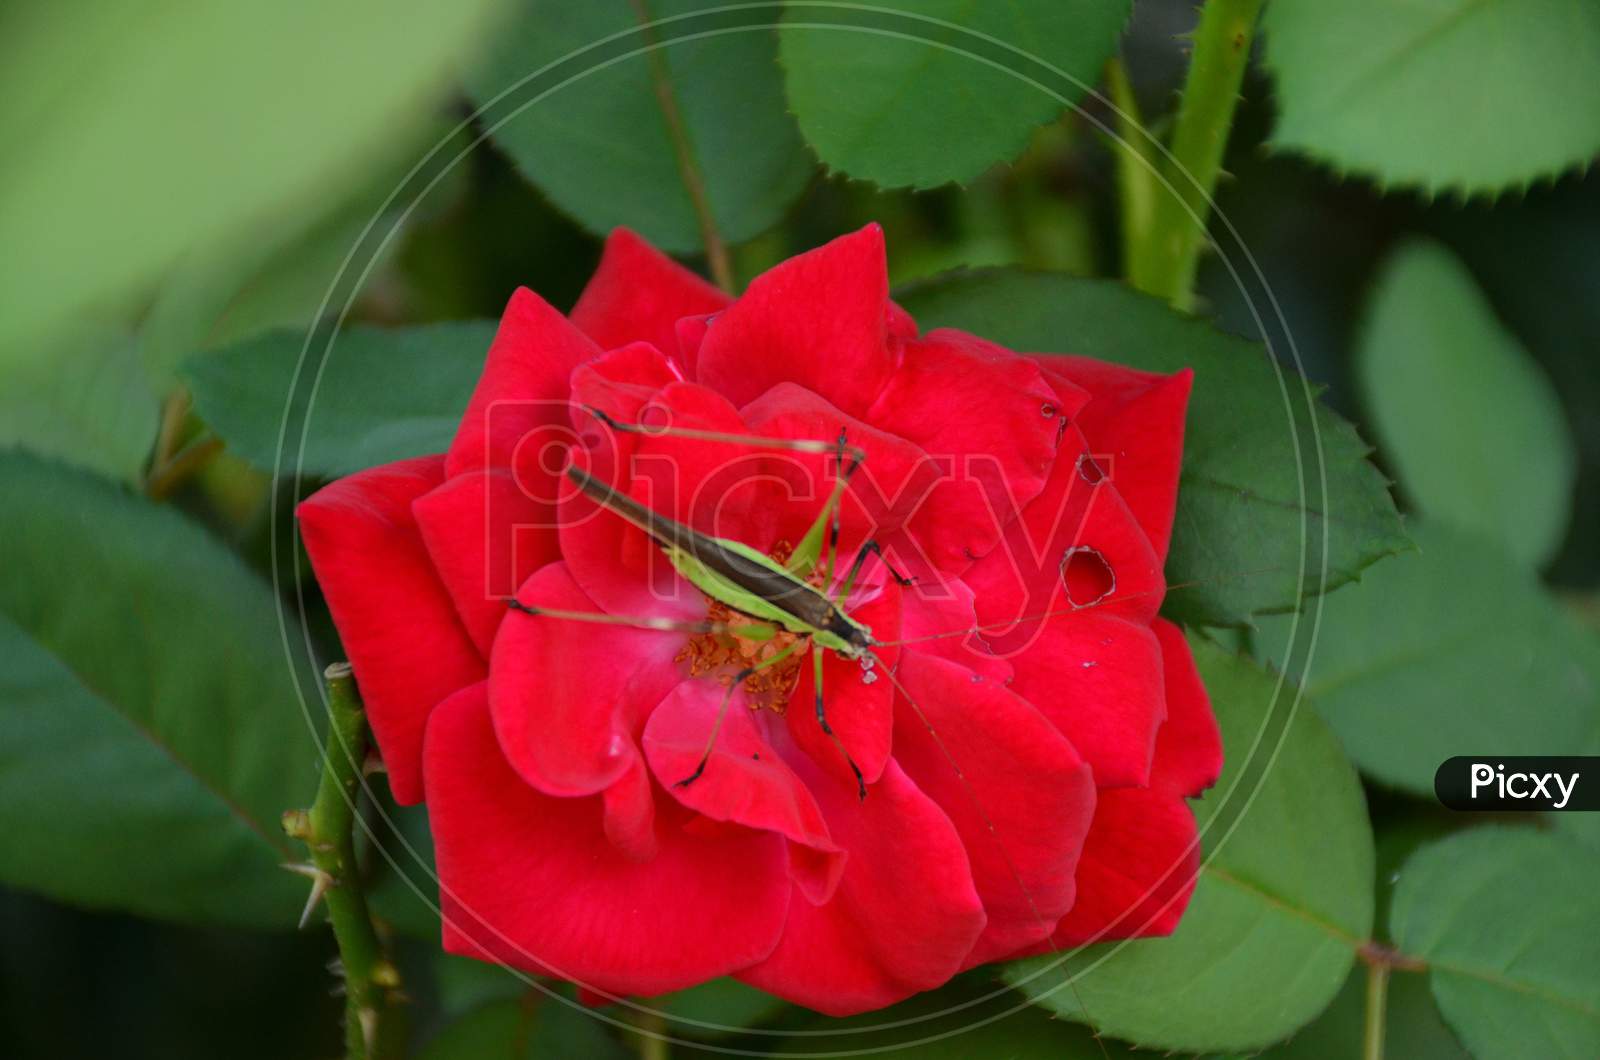 The Green Bug Insect On The Red Rose In The Garden.